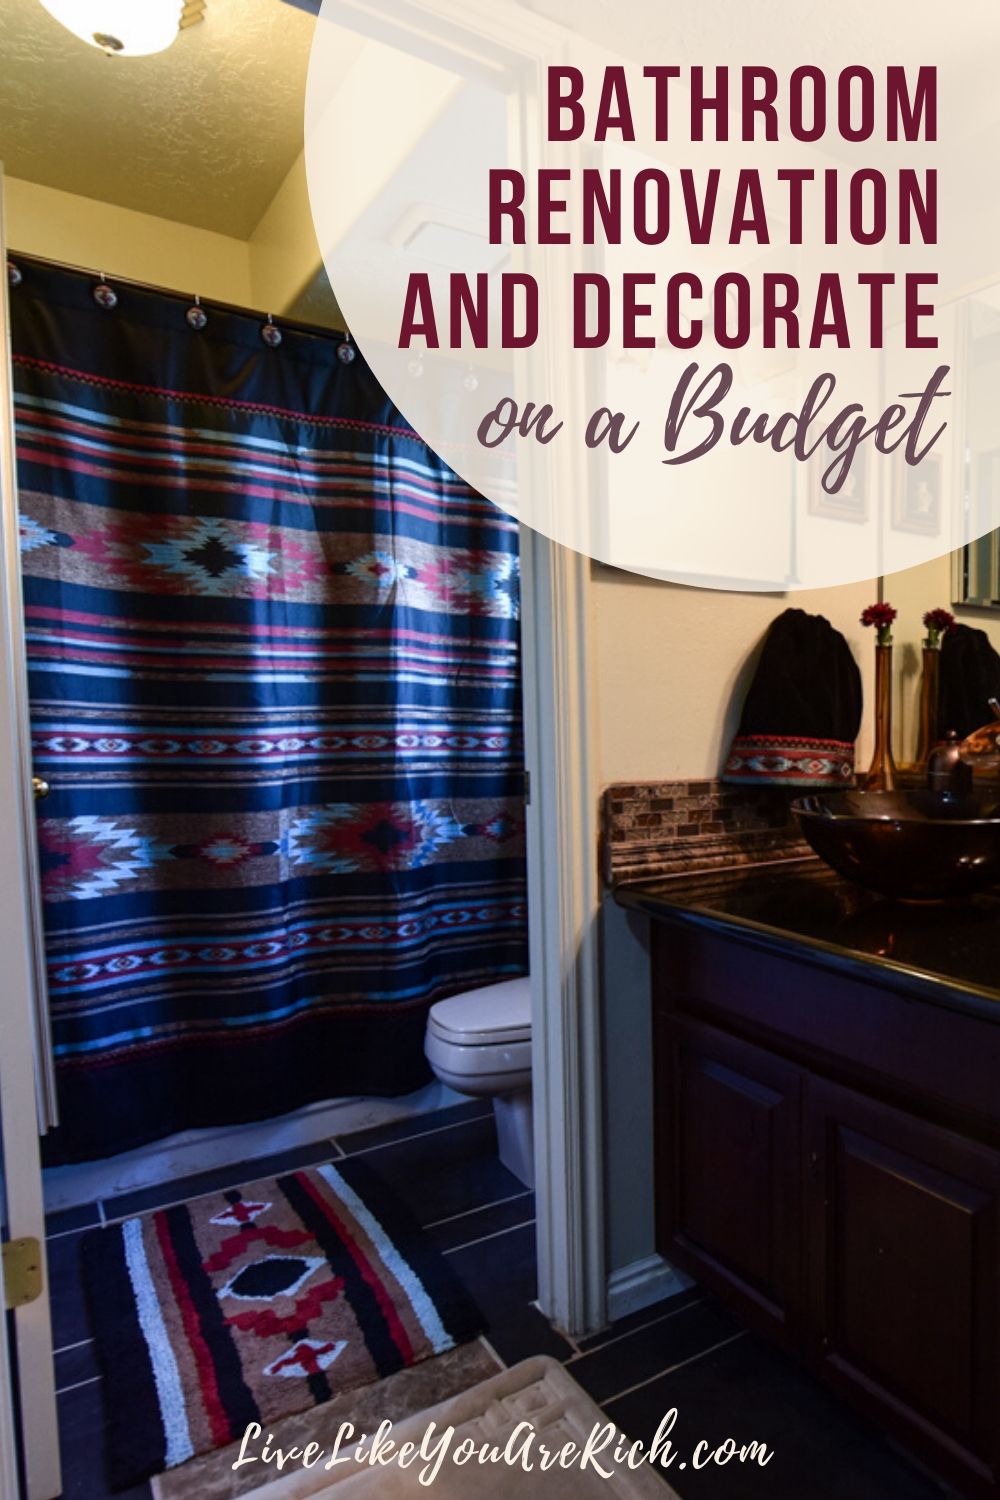 The average inexpensive DIY bathroom renovation is about $5,000. For just over $500 we were able to almost completely renovate, paint, and decorate our bathroom. I’m sharing how we did our bathroom renovation on a budget. 